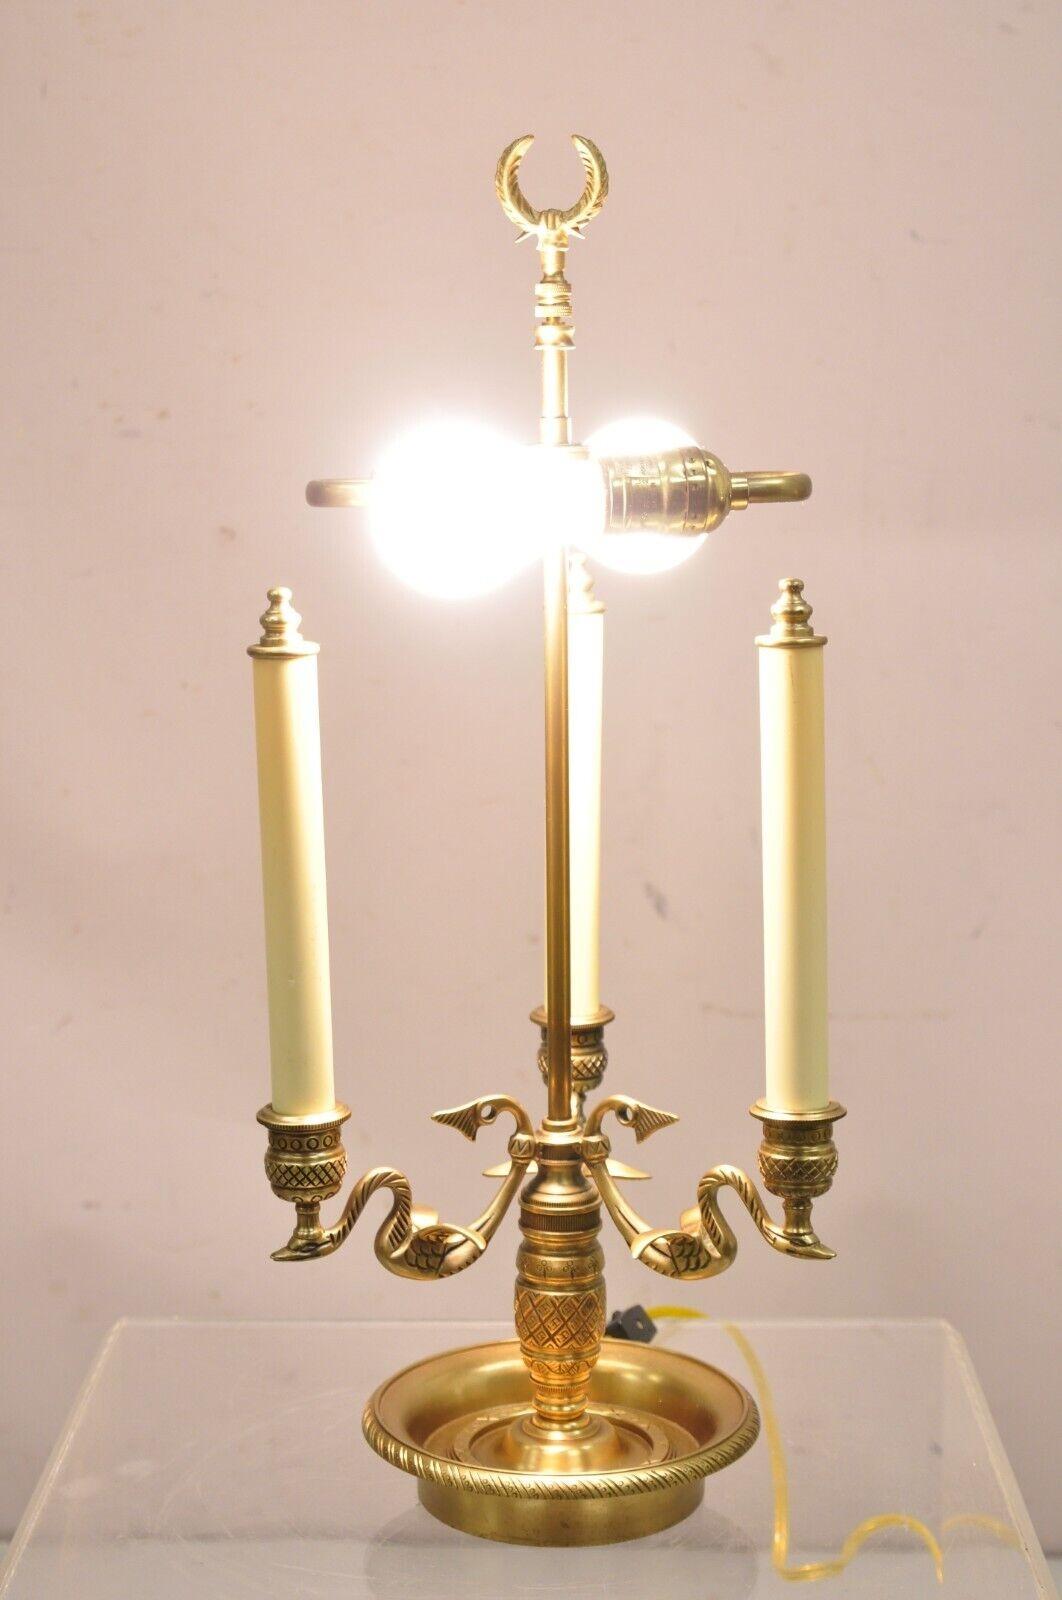 Empire Regency Style Brass Candlestick Bouillotte Desk Table Lamp with Swans (A). Item features 3 decorative candle sticks, brass lower dish, 3 winged swans, solid brass form, very nice vintage item. Mid to Late 20th Century. Measurements: 21